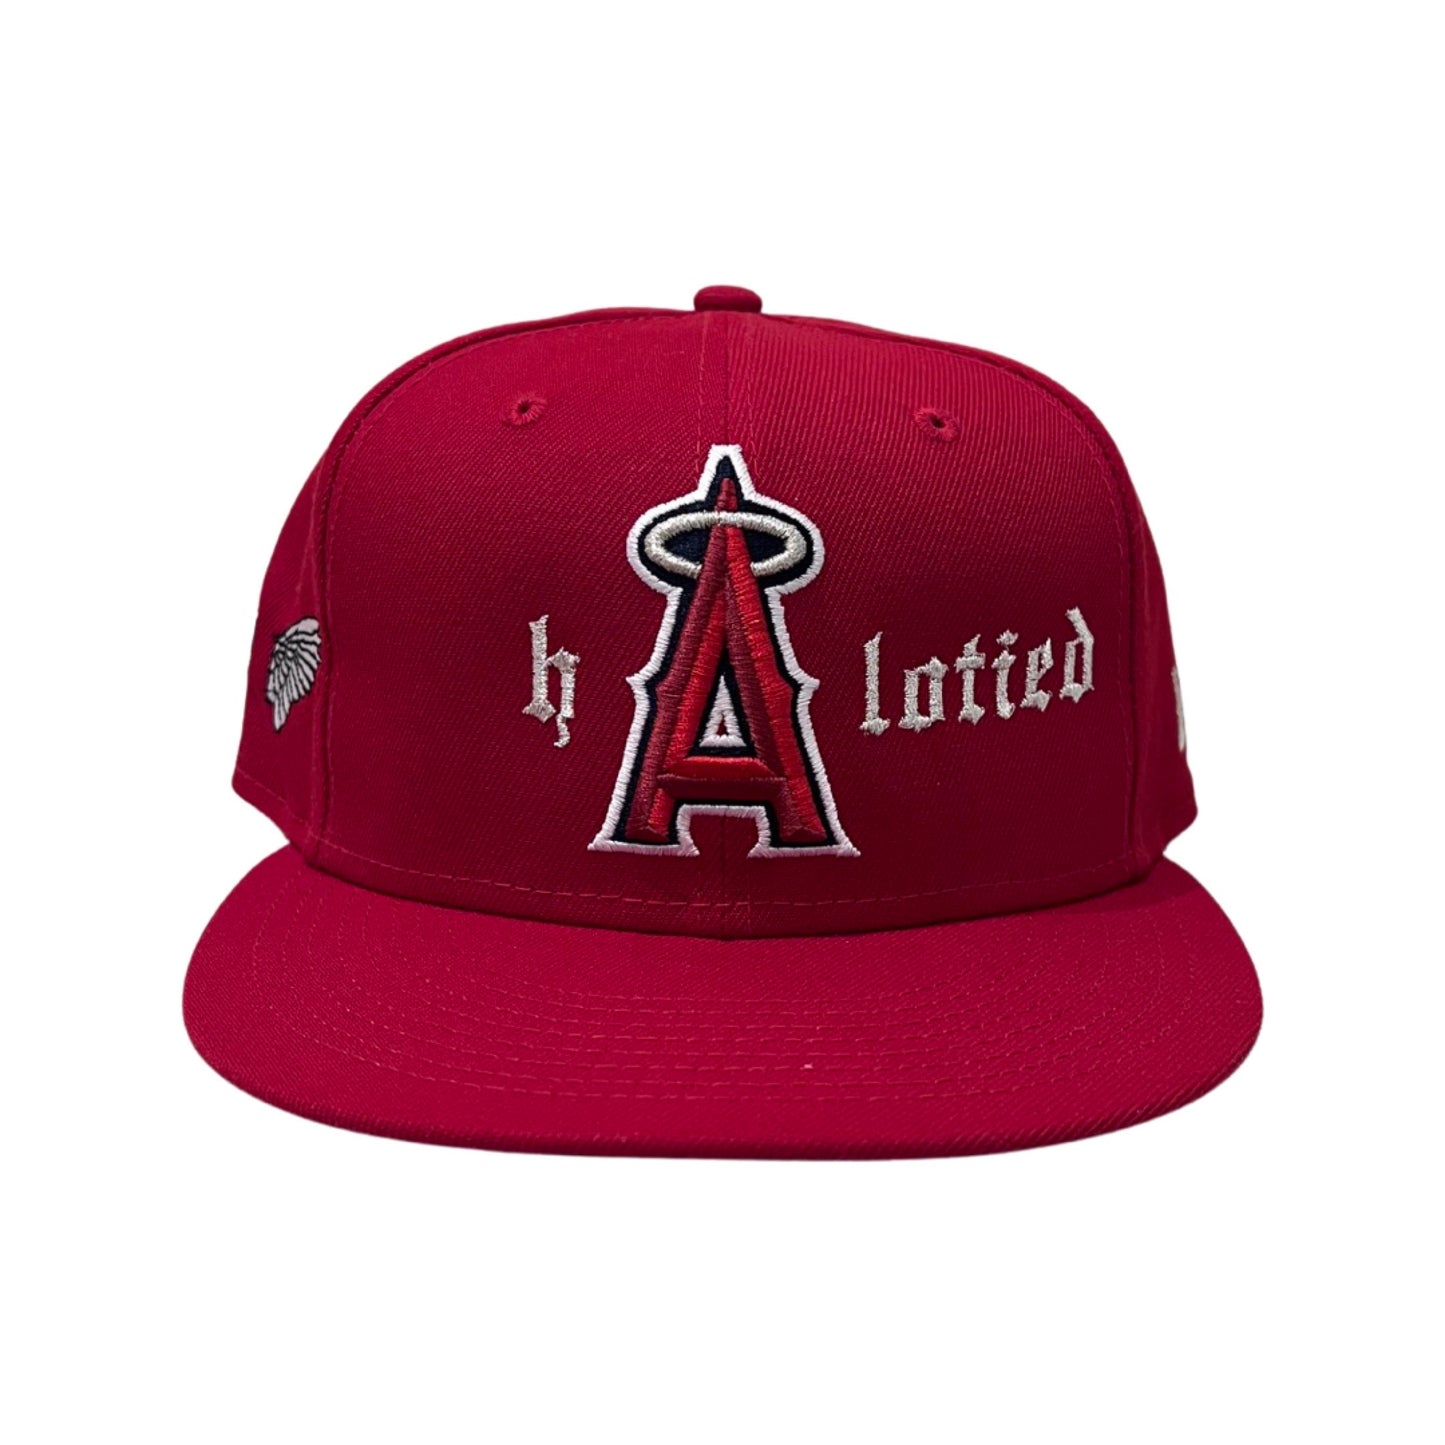 10/12 HALO FITTED HAT SIZE 7 3/8 – HALOTIED